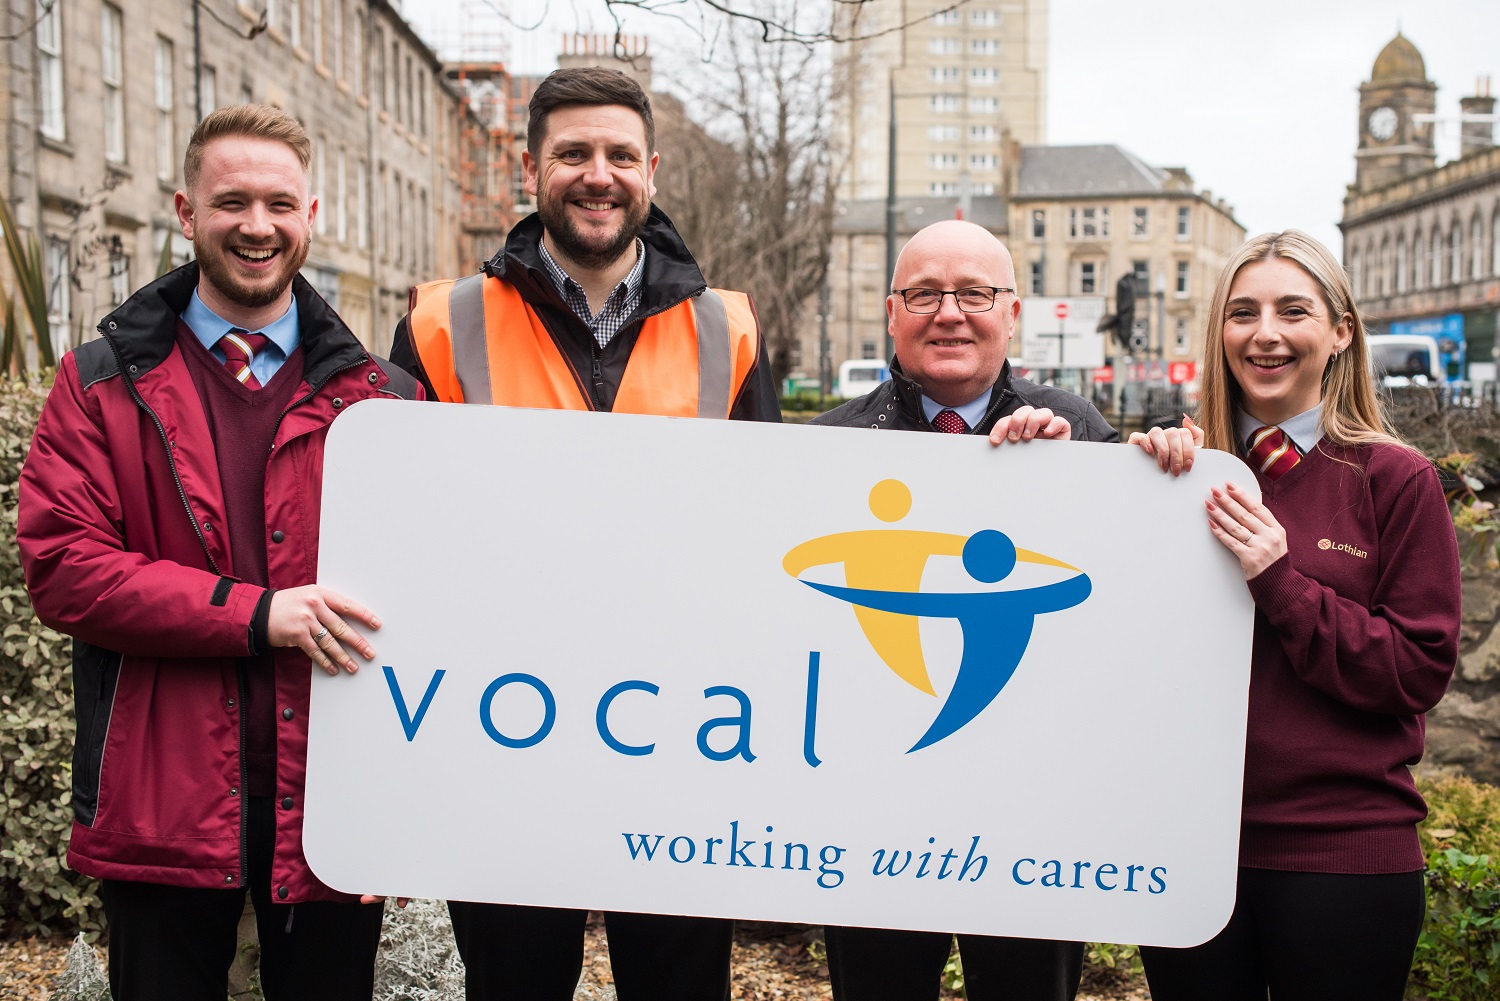 Lothian announces VOCAL as Charity of Choice